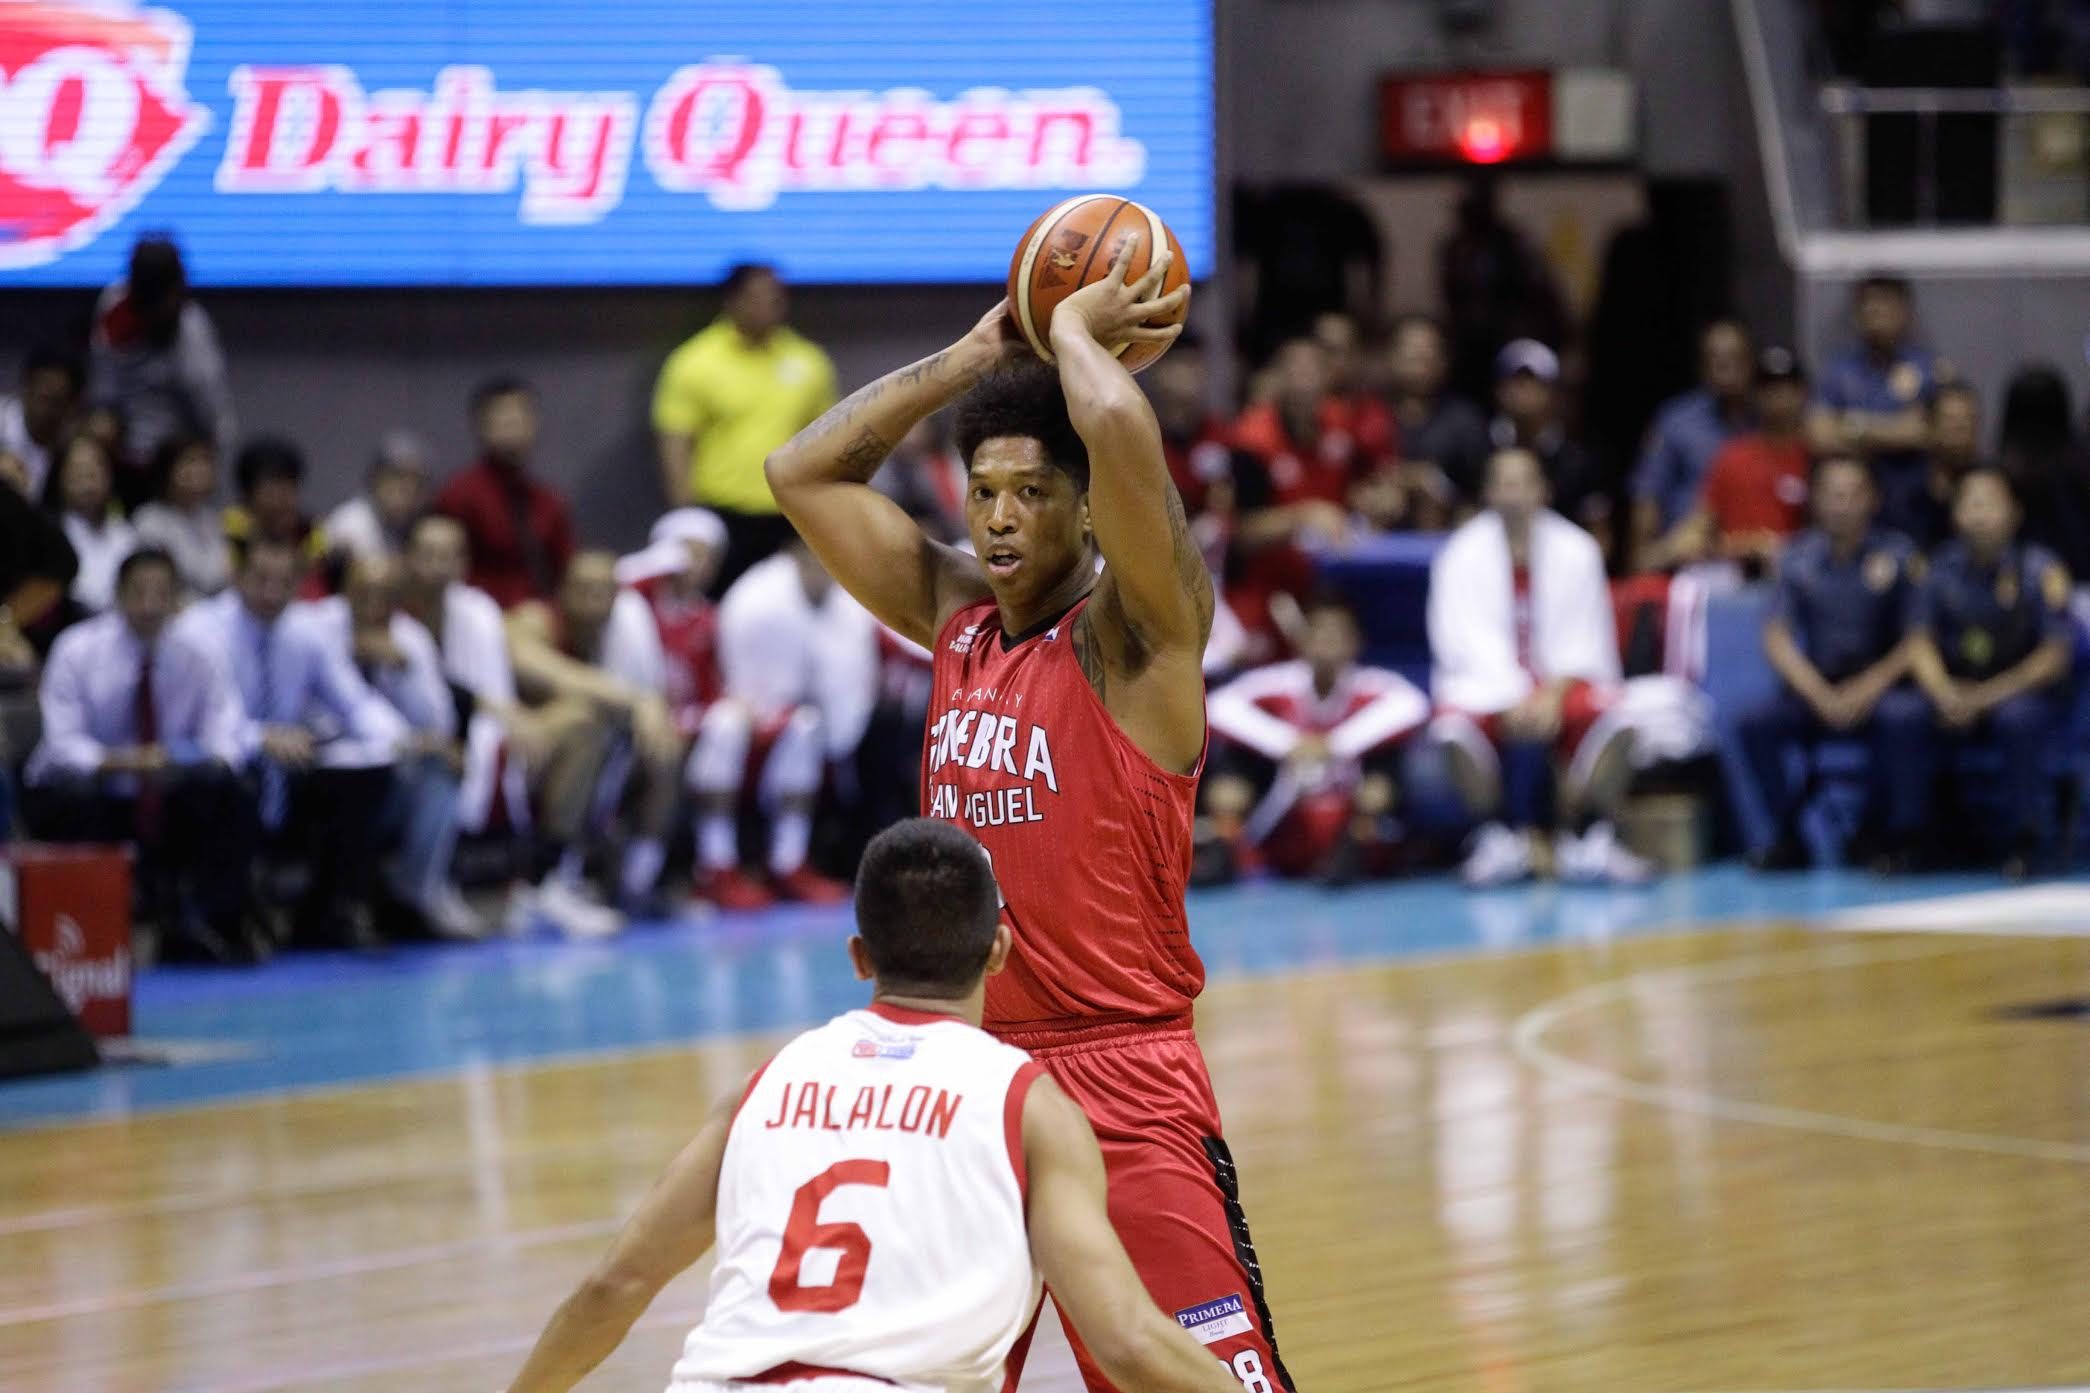 Devance, playing through pain, refuses to let Ginebra down